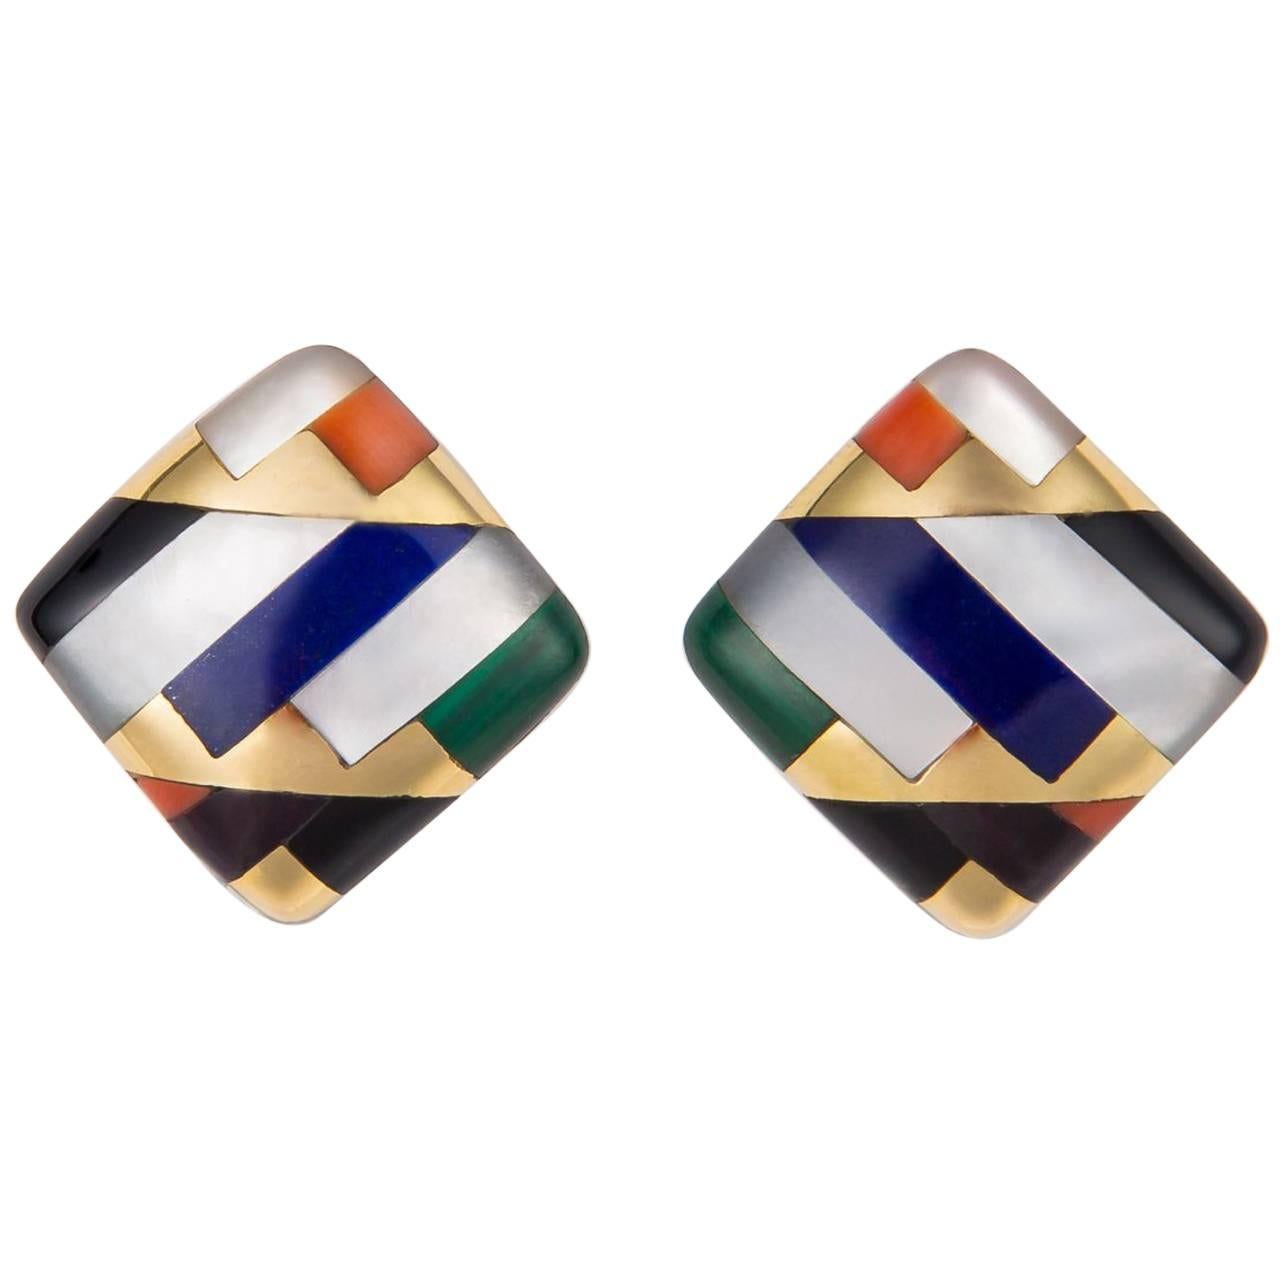 Asch Grossbardt Inlaid Colored Stone Earrings